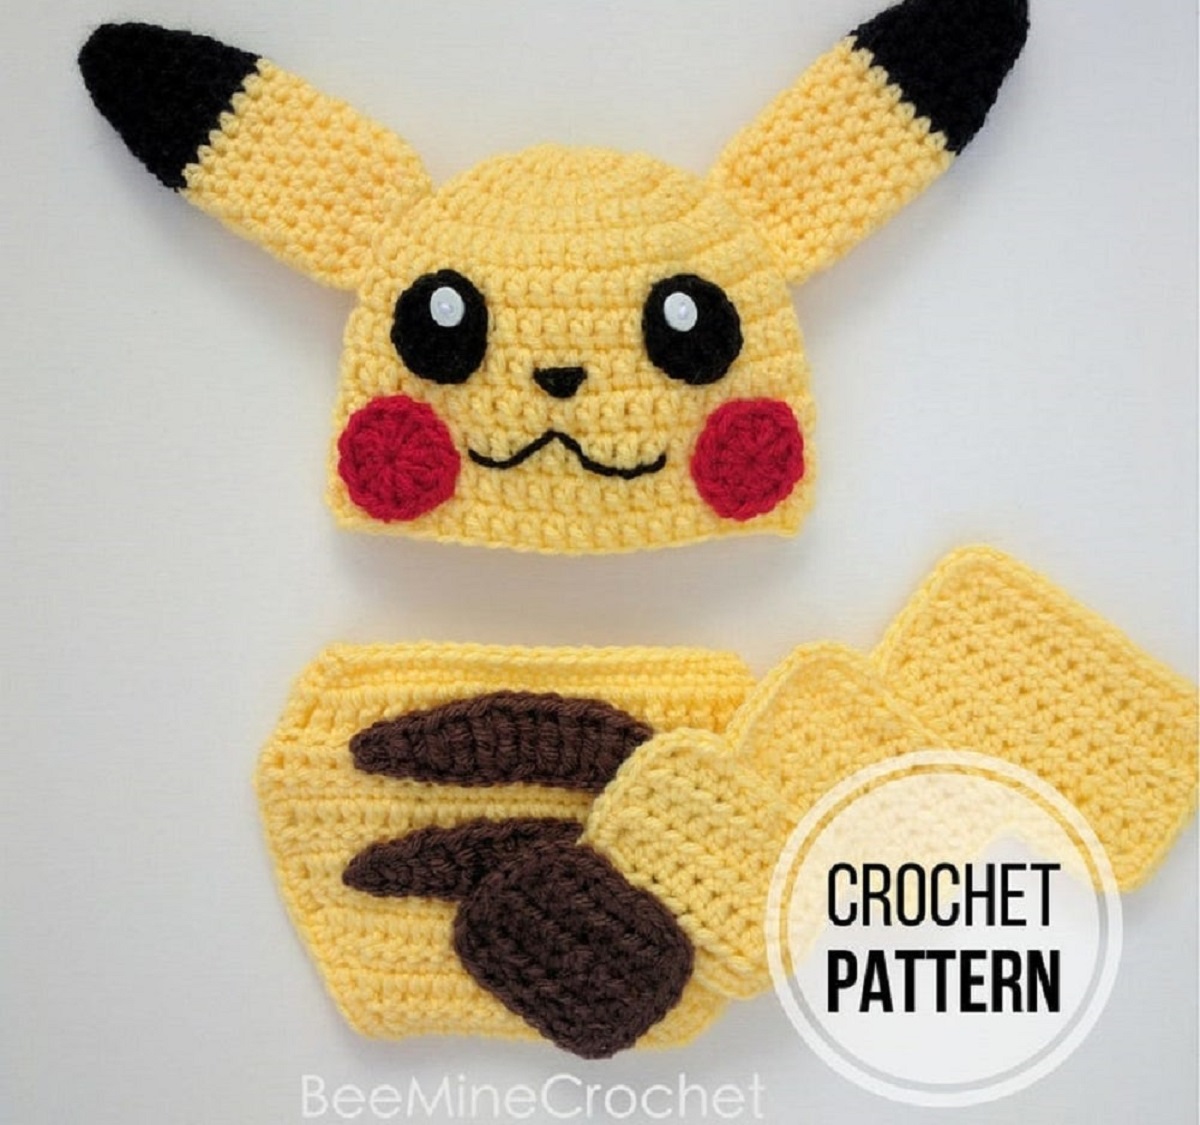 Crochet Pikachu beanie hat with large pointy ears either side, a yellow and brown striped diaper, and yellow scarf.